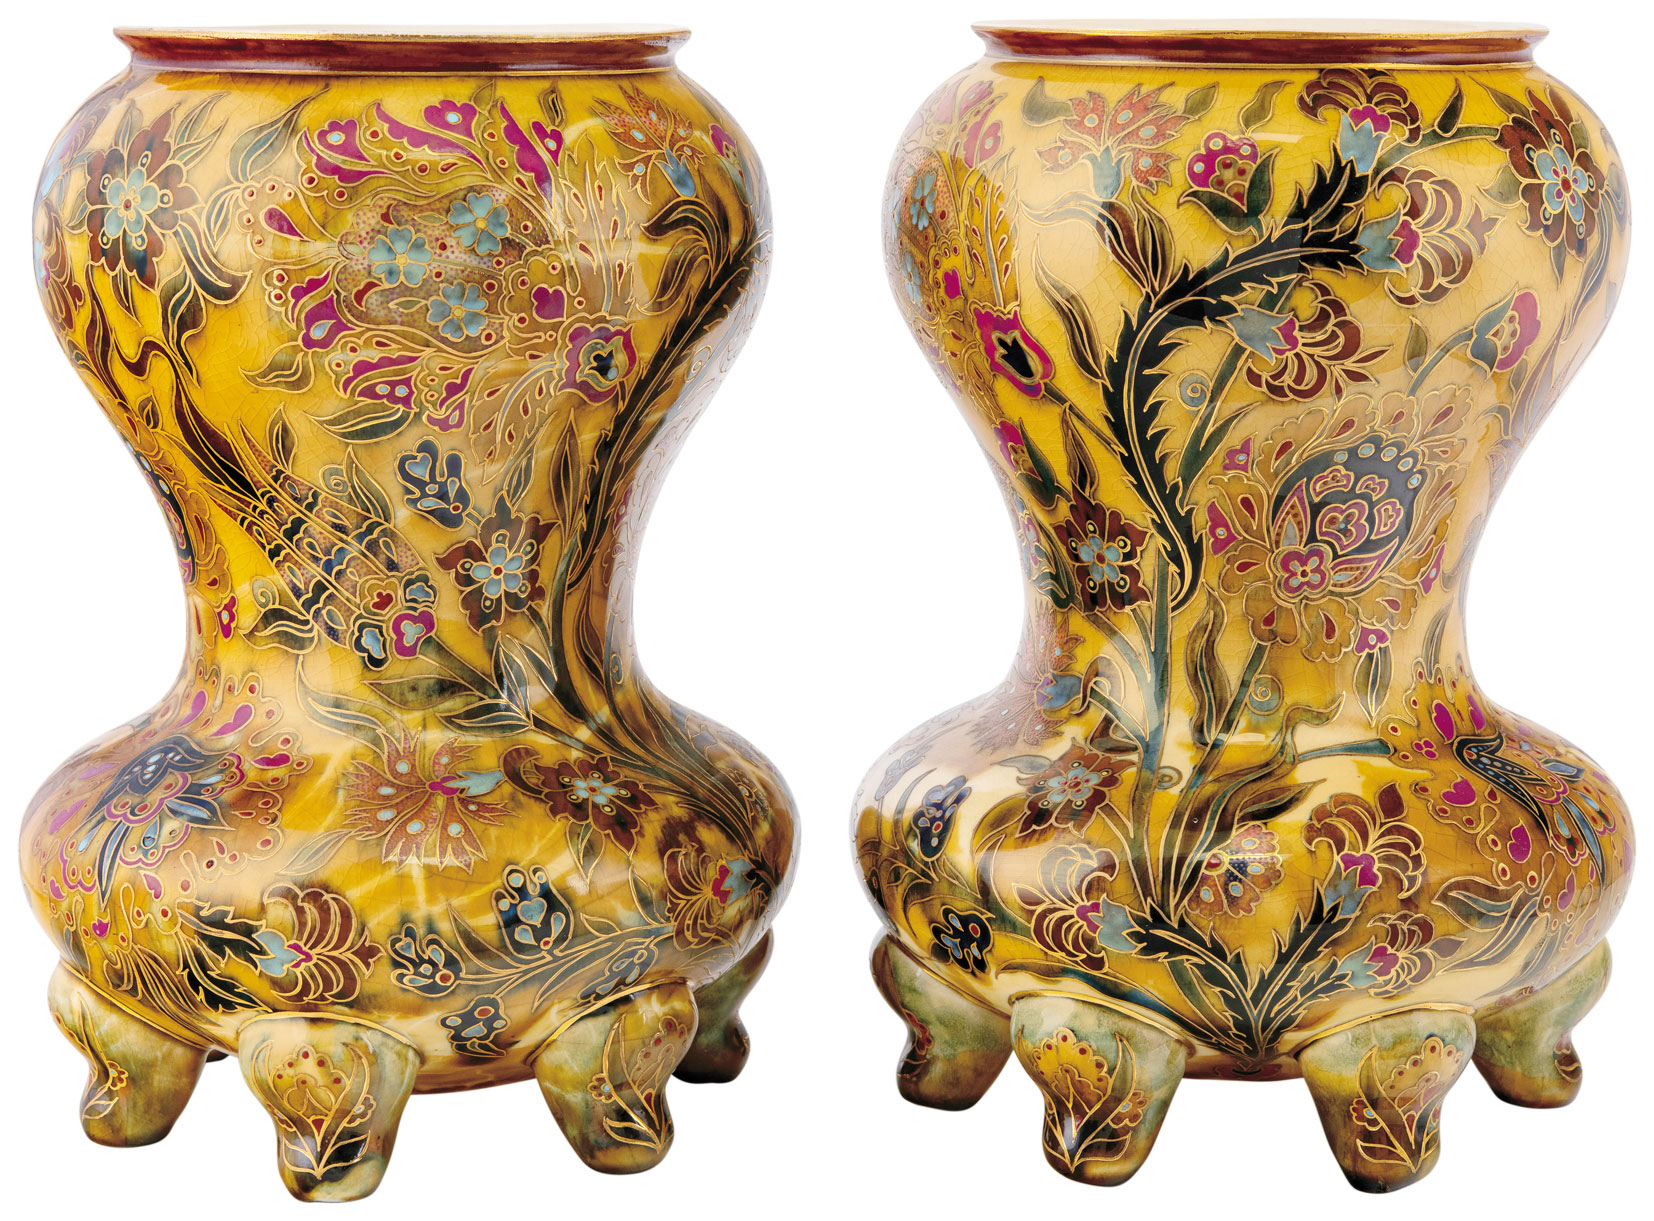 Zsolnay Pair of Vases, Decorated with ORIENTAL Motifs, 1883, PLAN PRESUMABLY BY ZSOLNAY JÚLIA